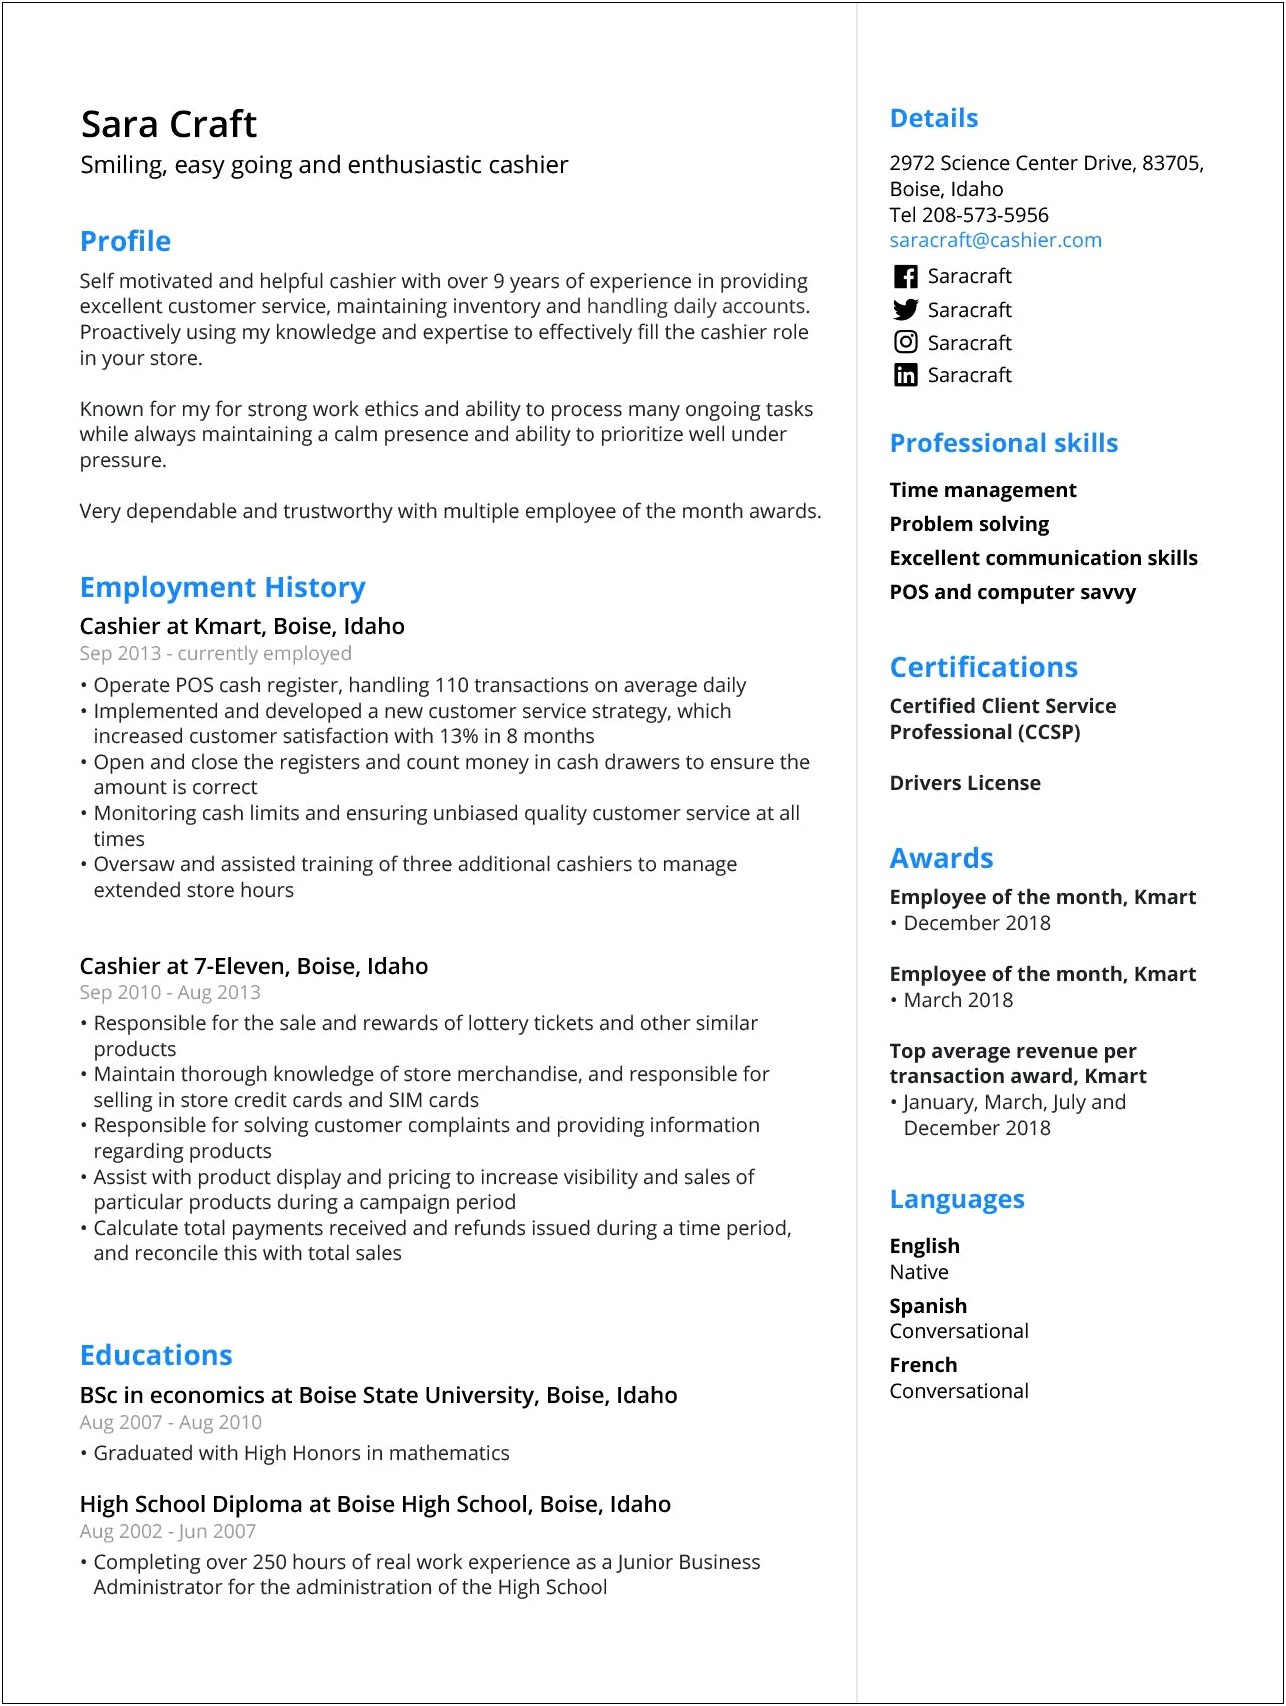 Employee Of The Month Description Resume